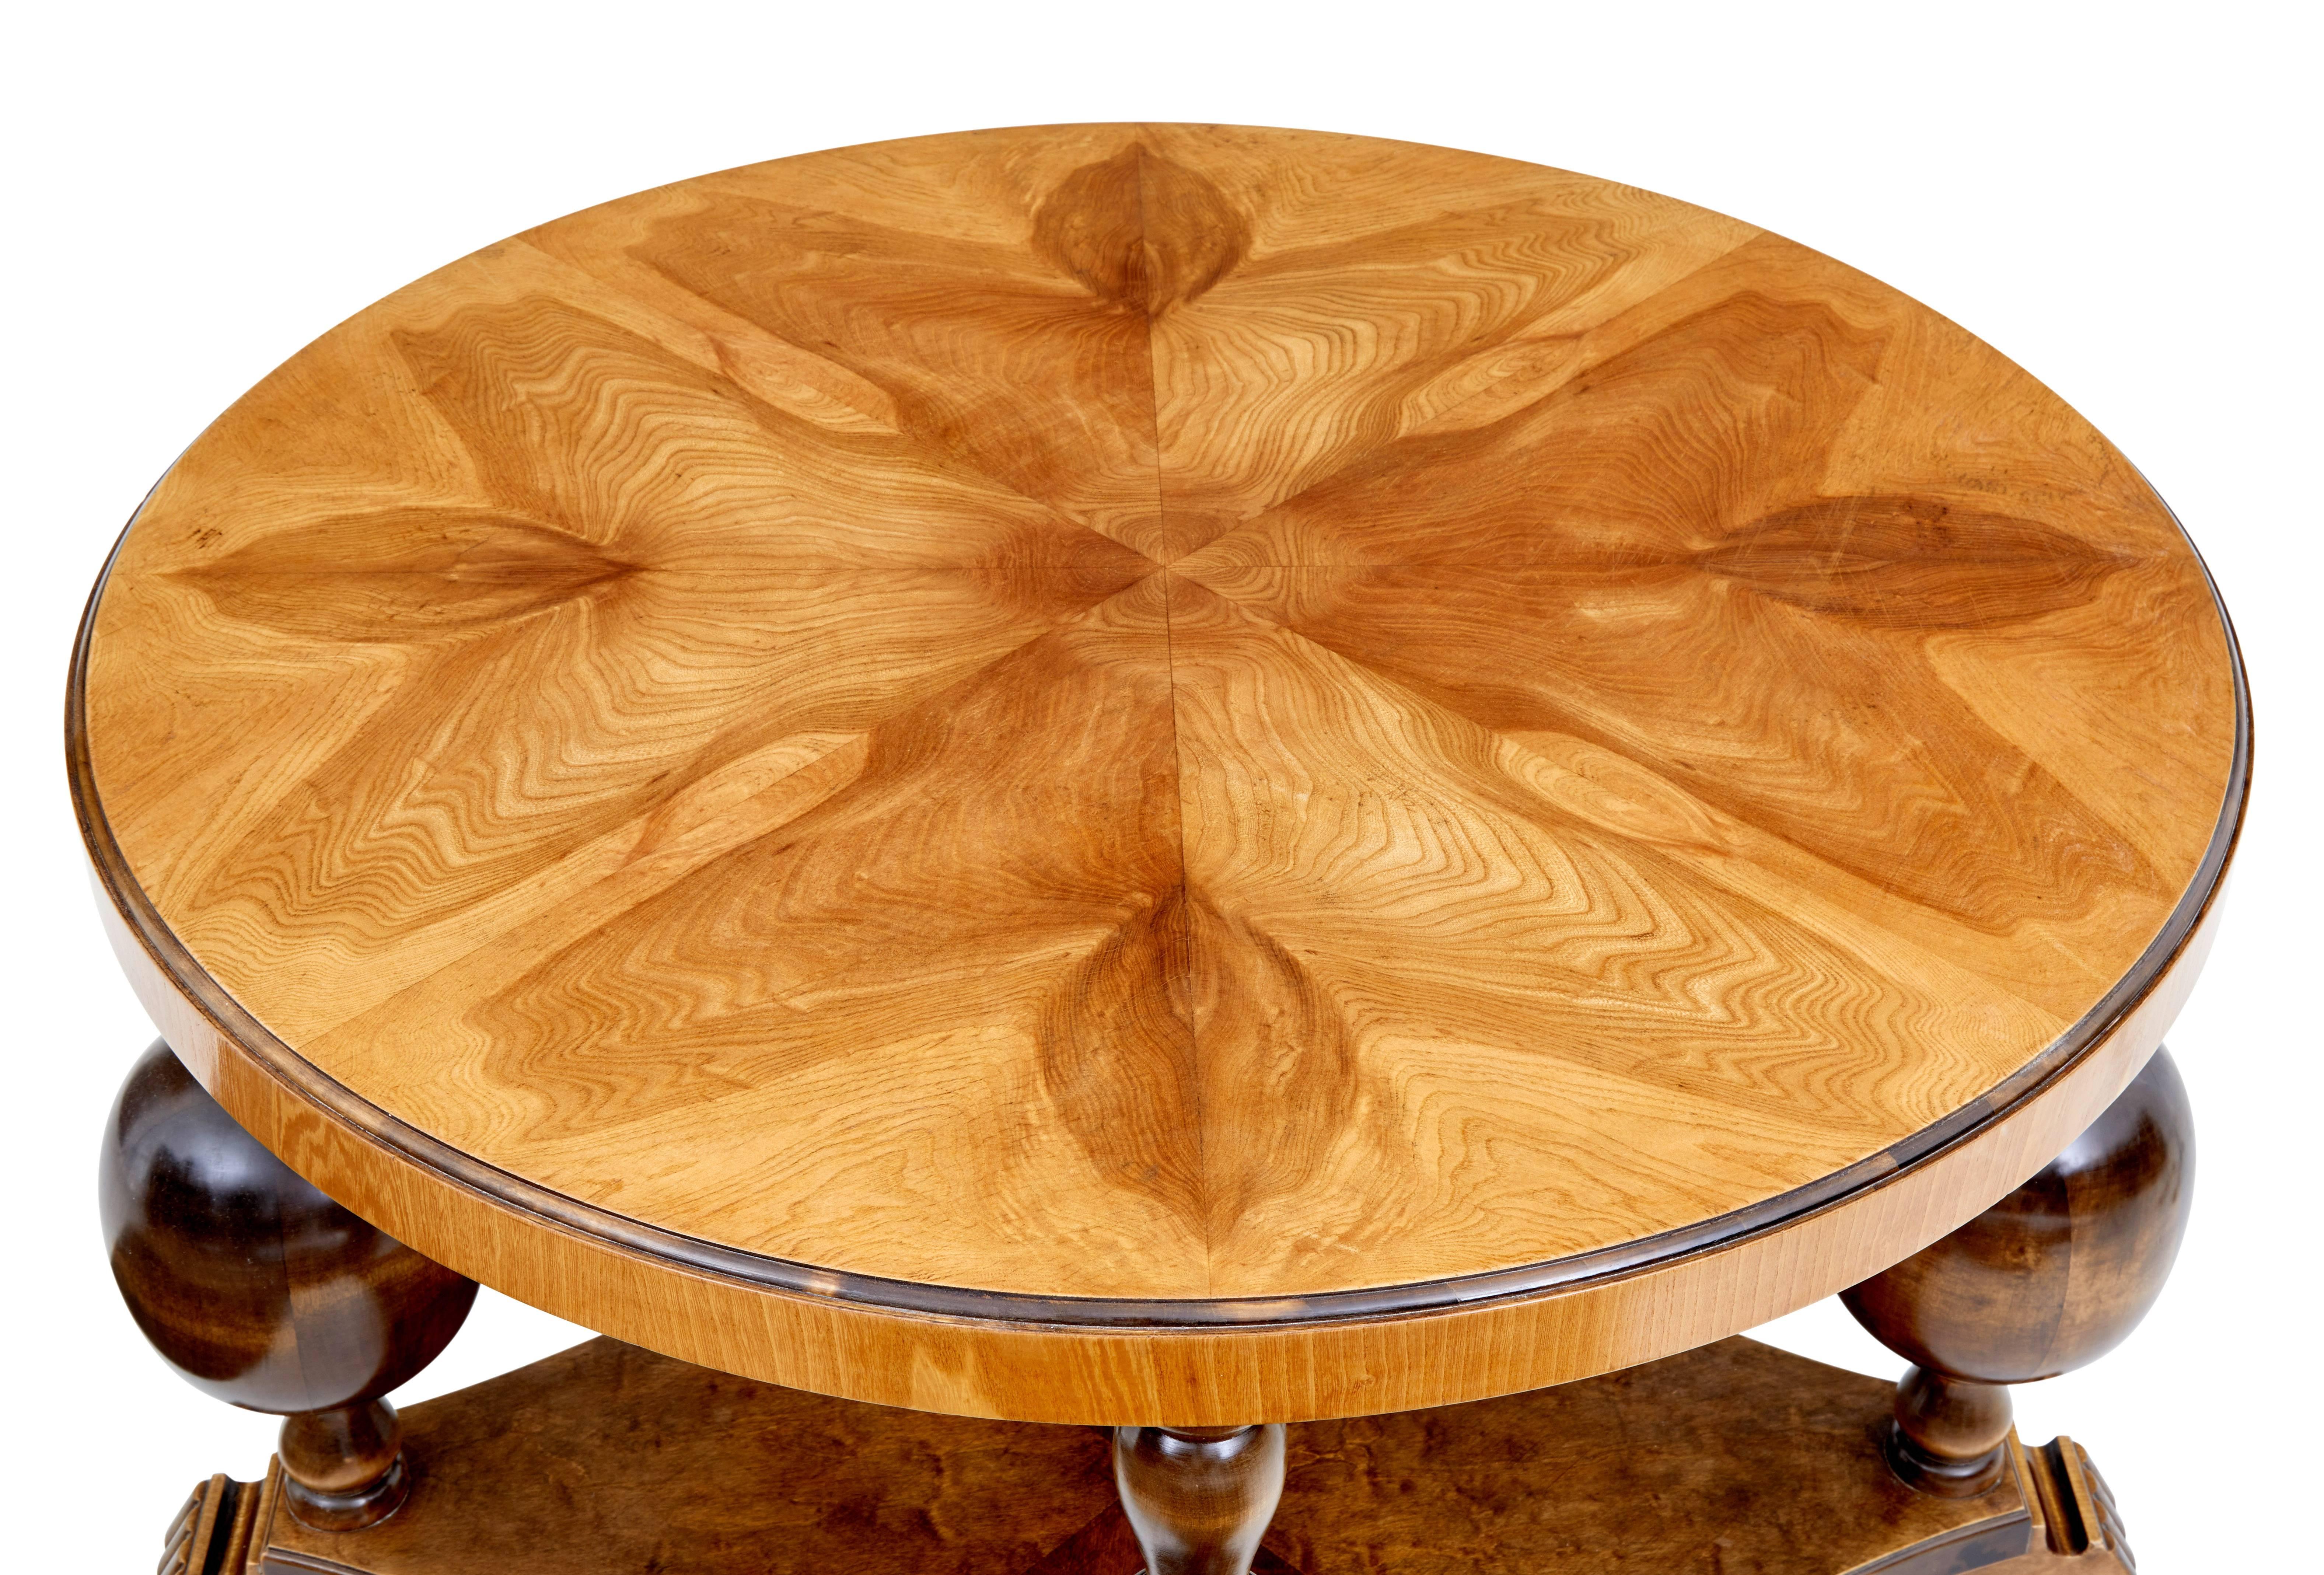 Fine quality Art Deco inspired coffee table, circa 1950.

Beautiful elm circular top, standing on 4 birch baluster support legs united by a lower shelf.